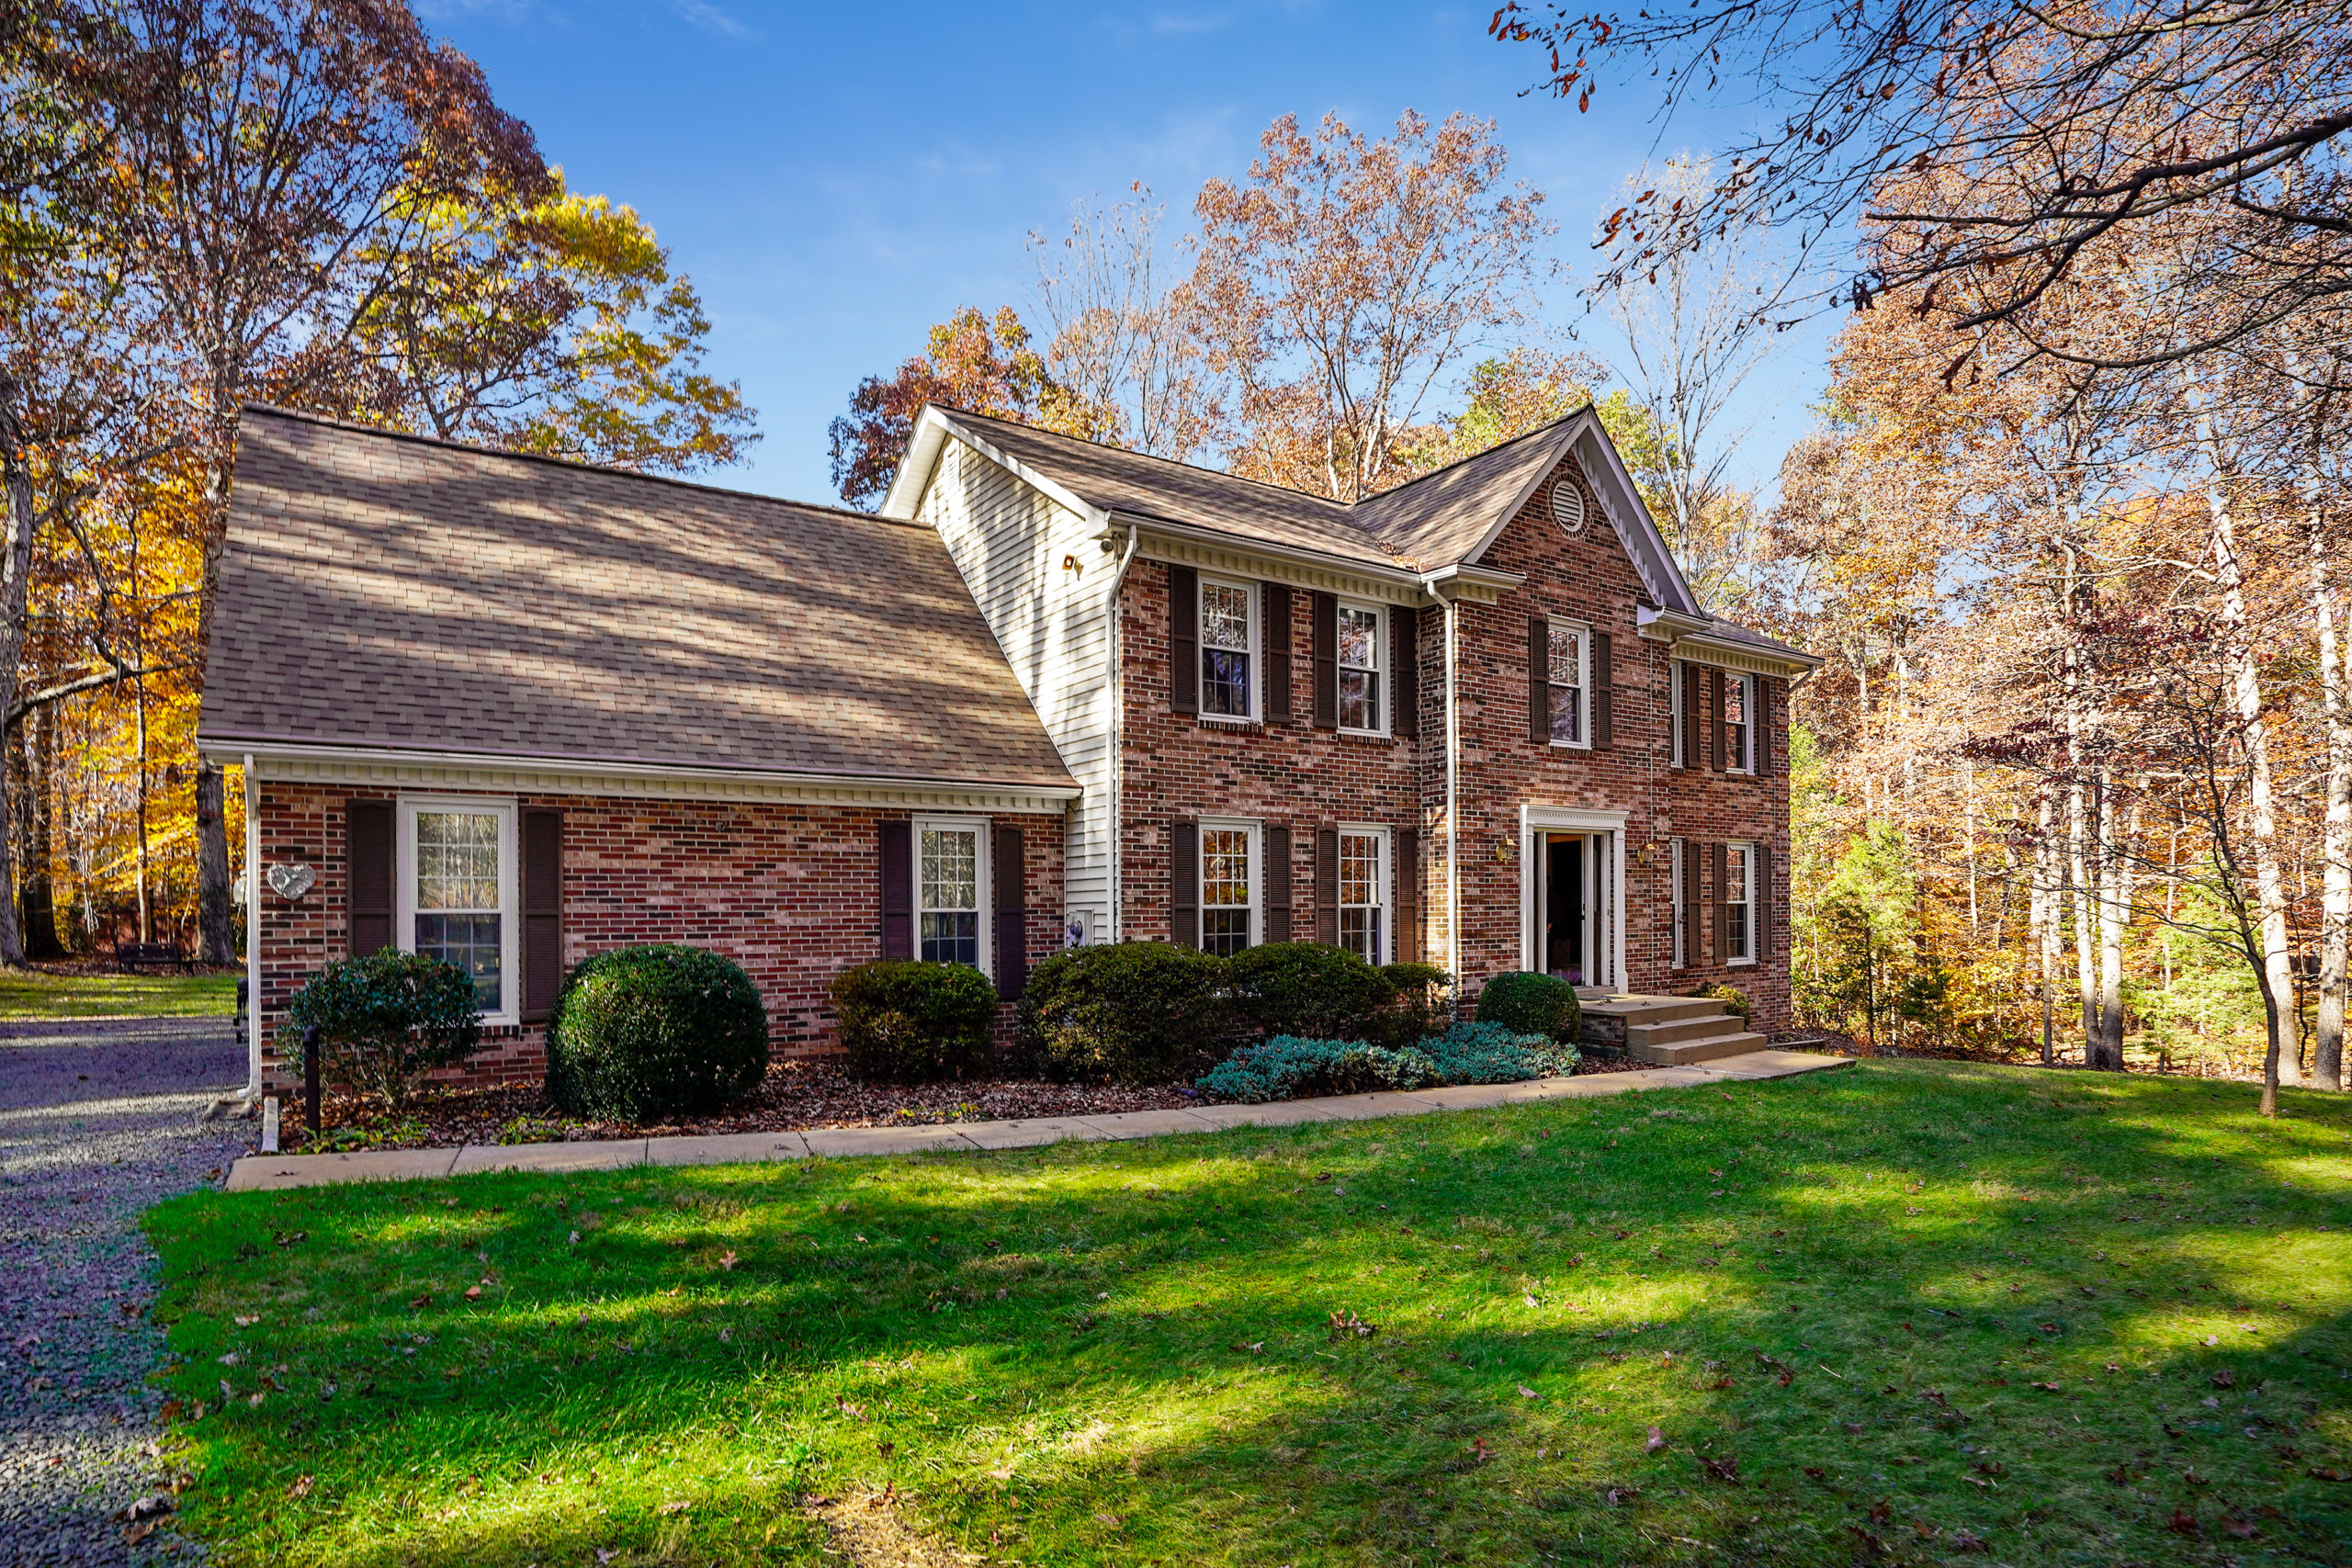 Under Contract in One Day – Nokesville